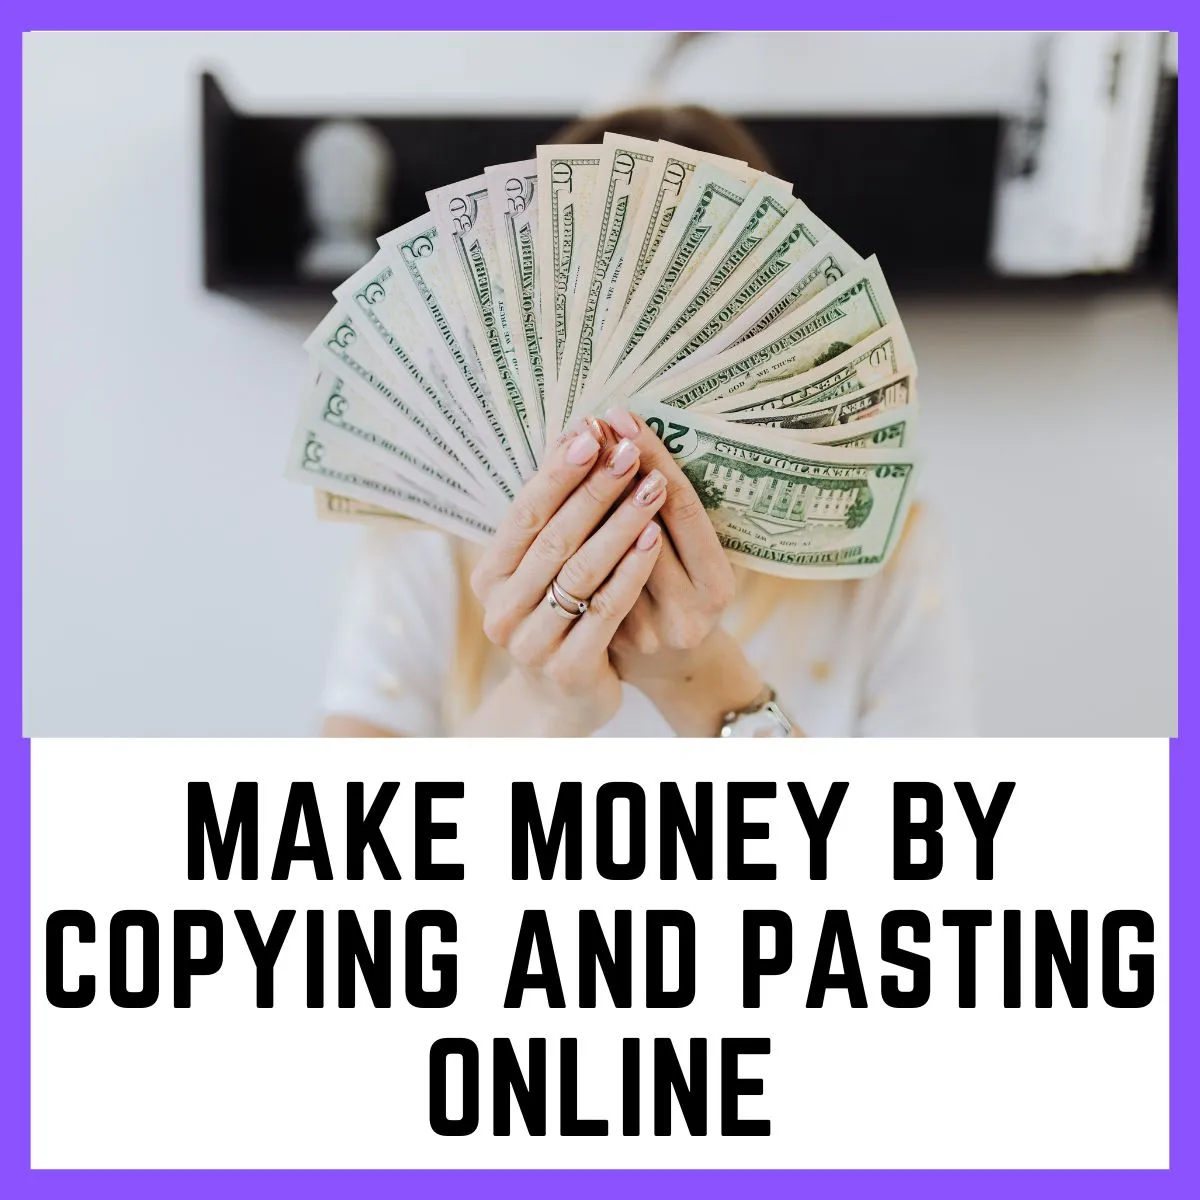 Make-Money-by-Copying-and-Pasting-Online